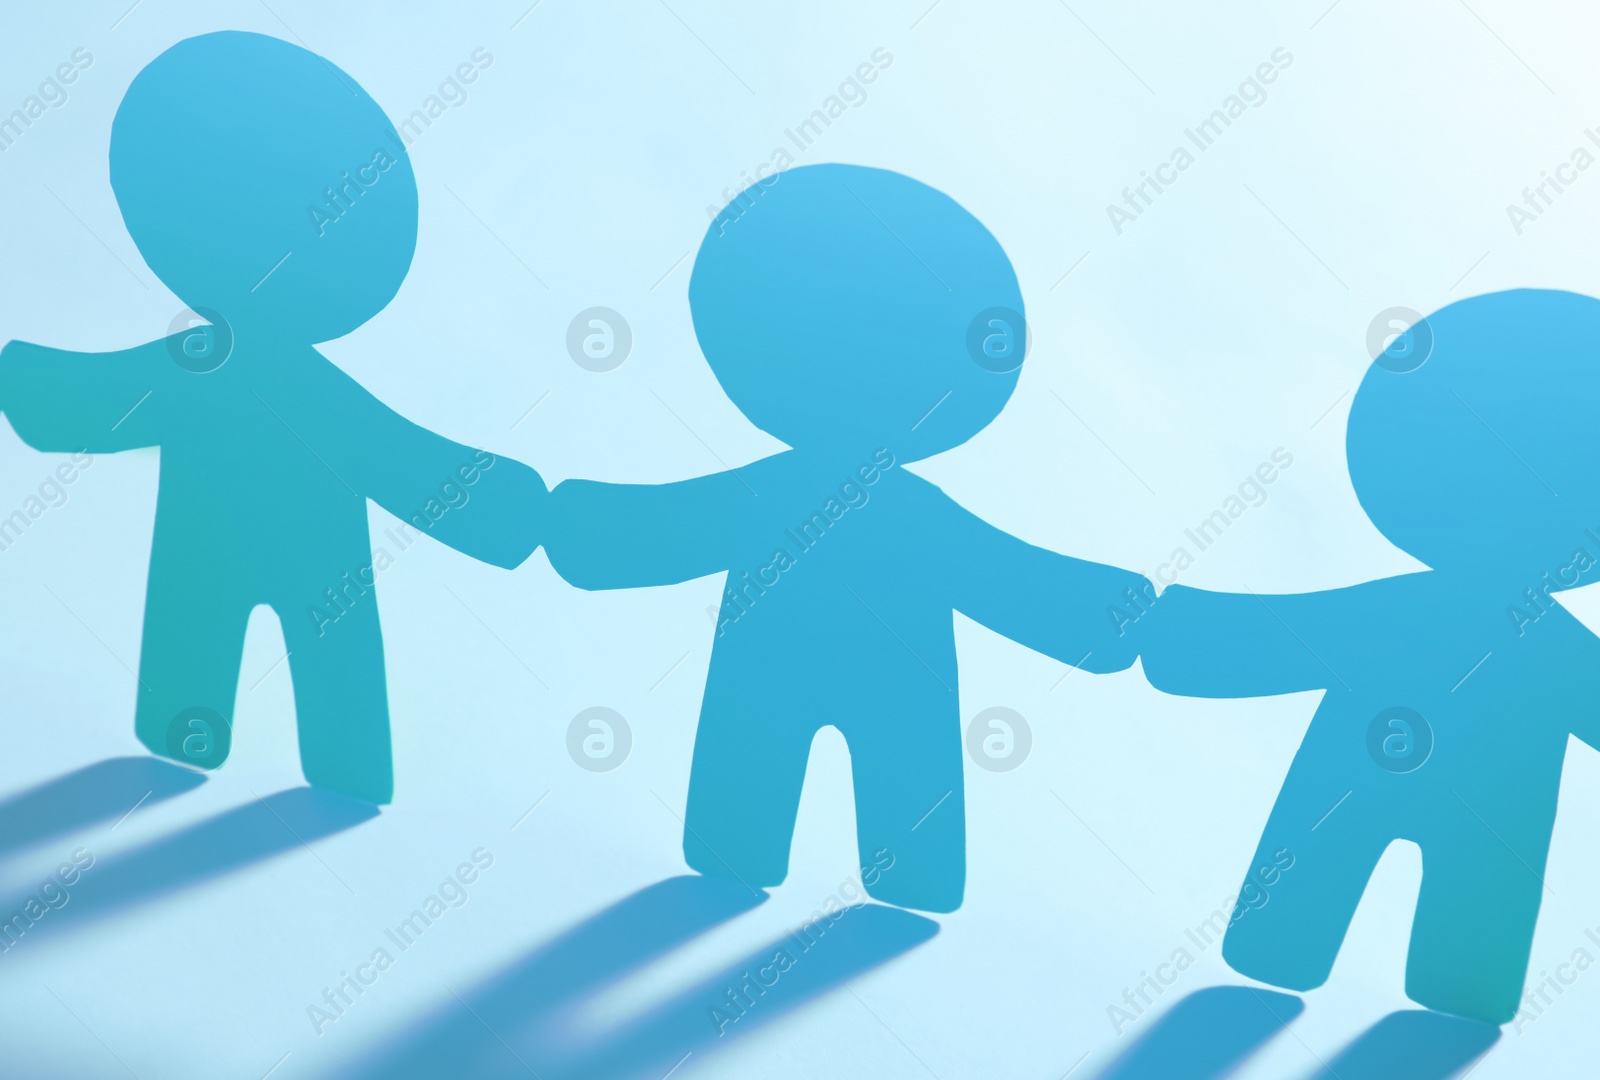 Photo of Paper people holding hands on light background. Unity concept